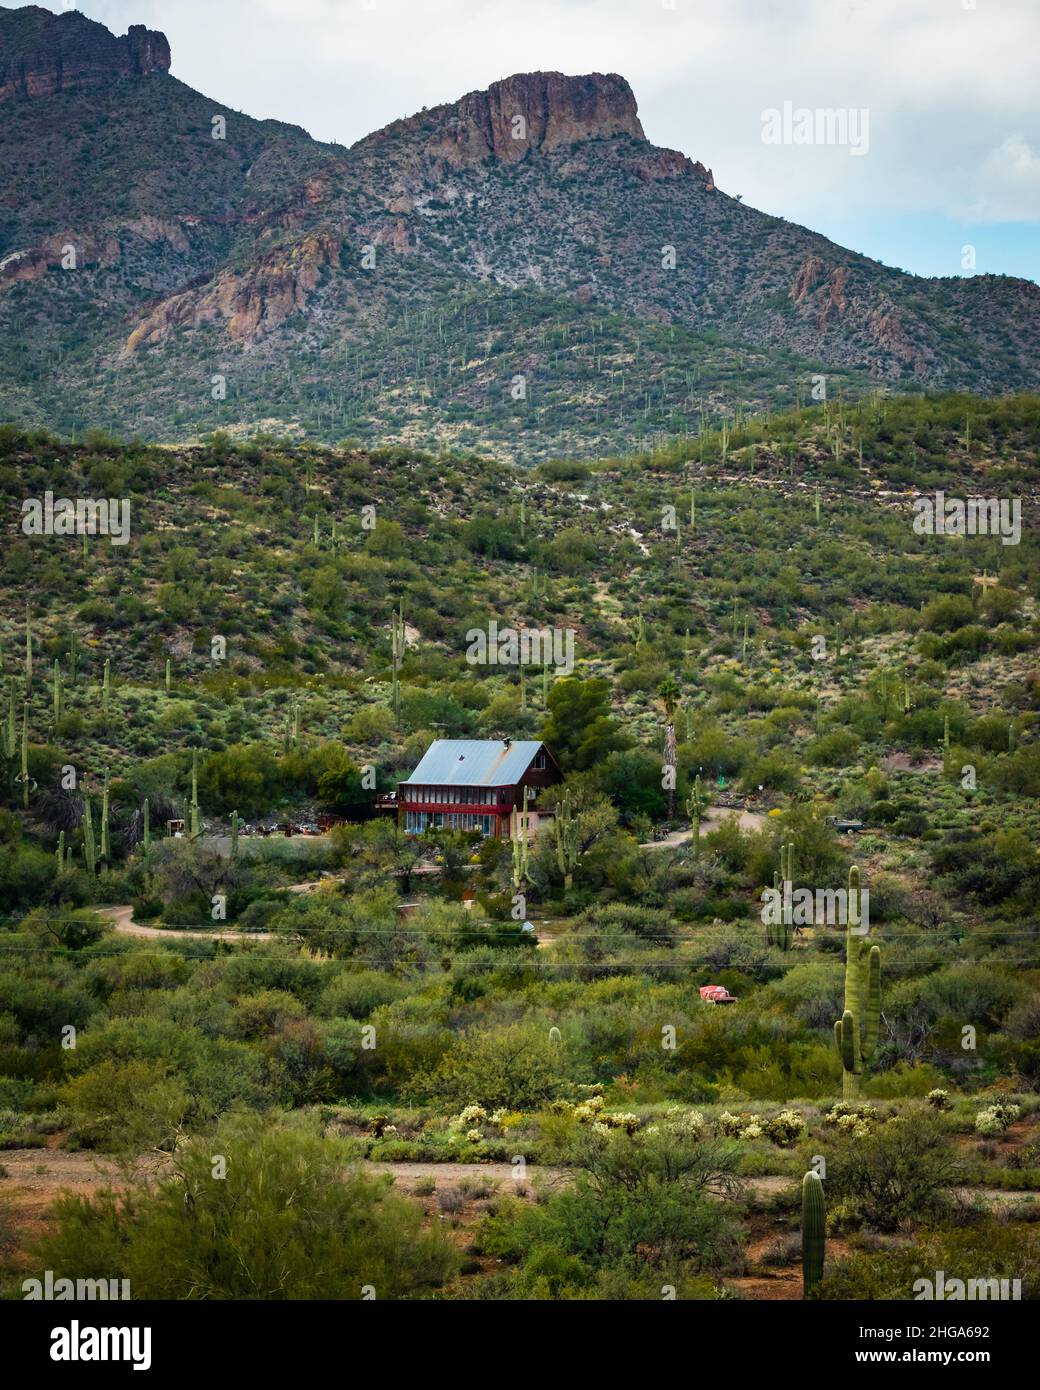 Secluded wooden house in the mountains of Cave Creek near horse ranch in Arizona, United States. Stock Photo